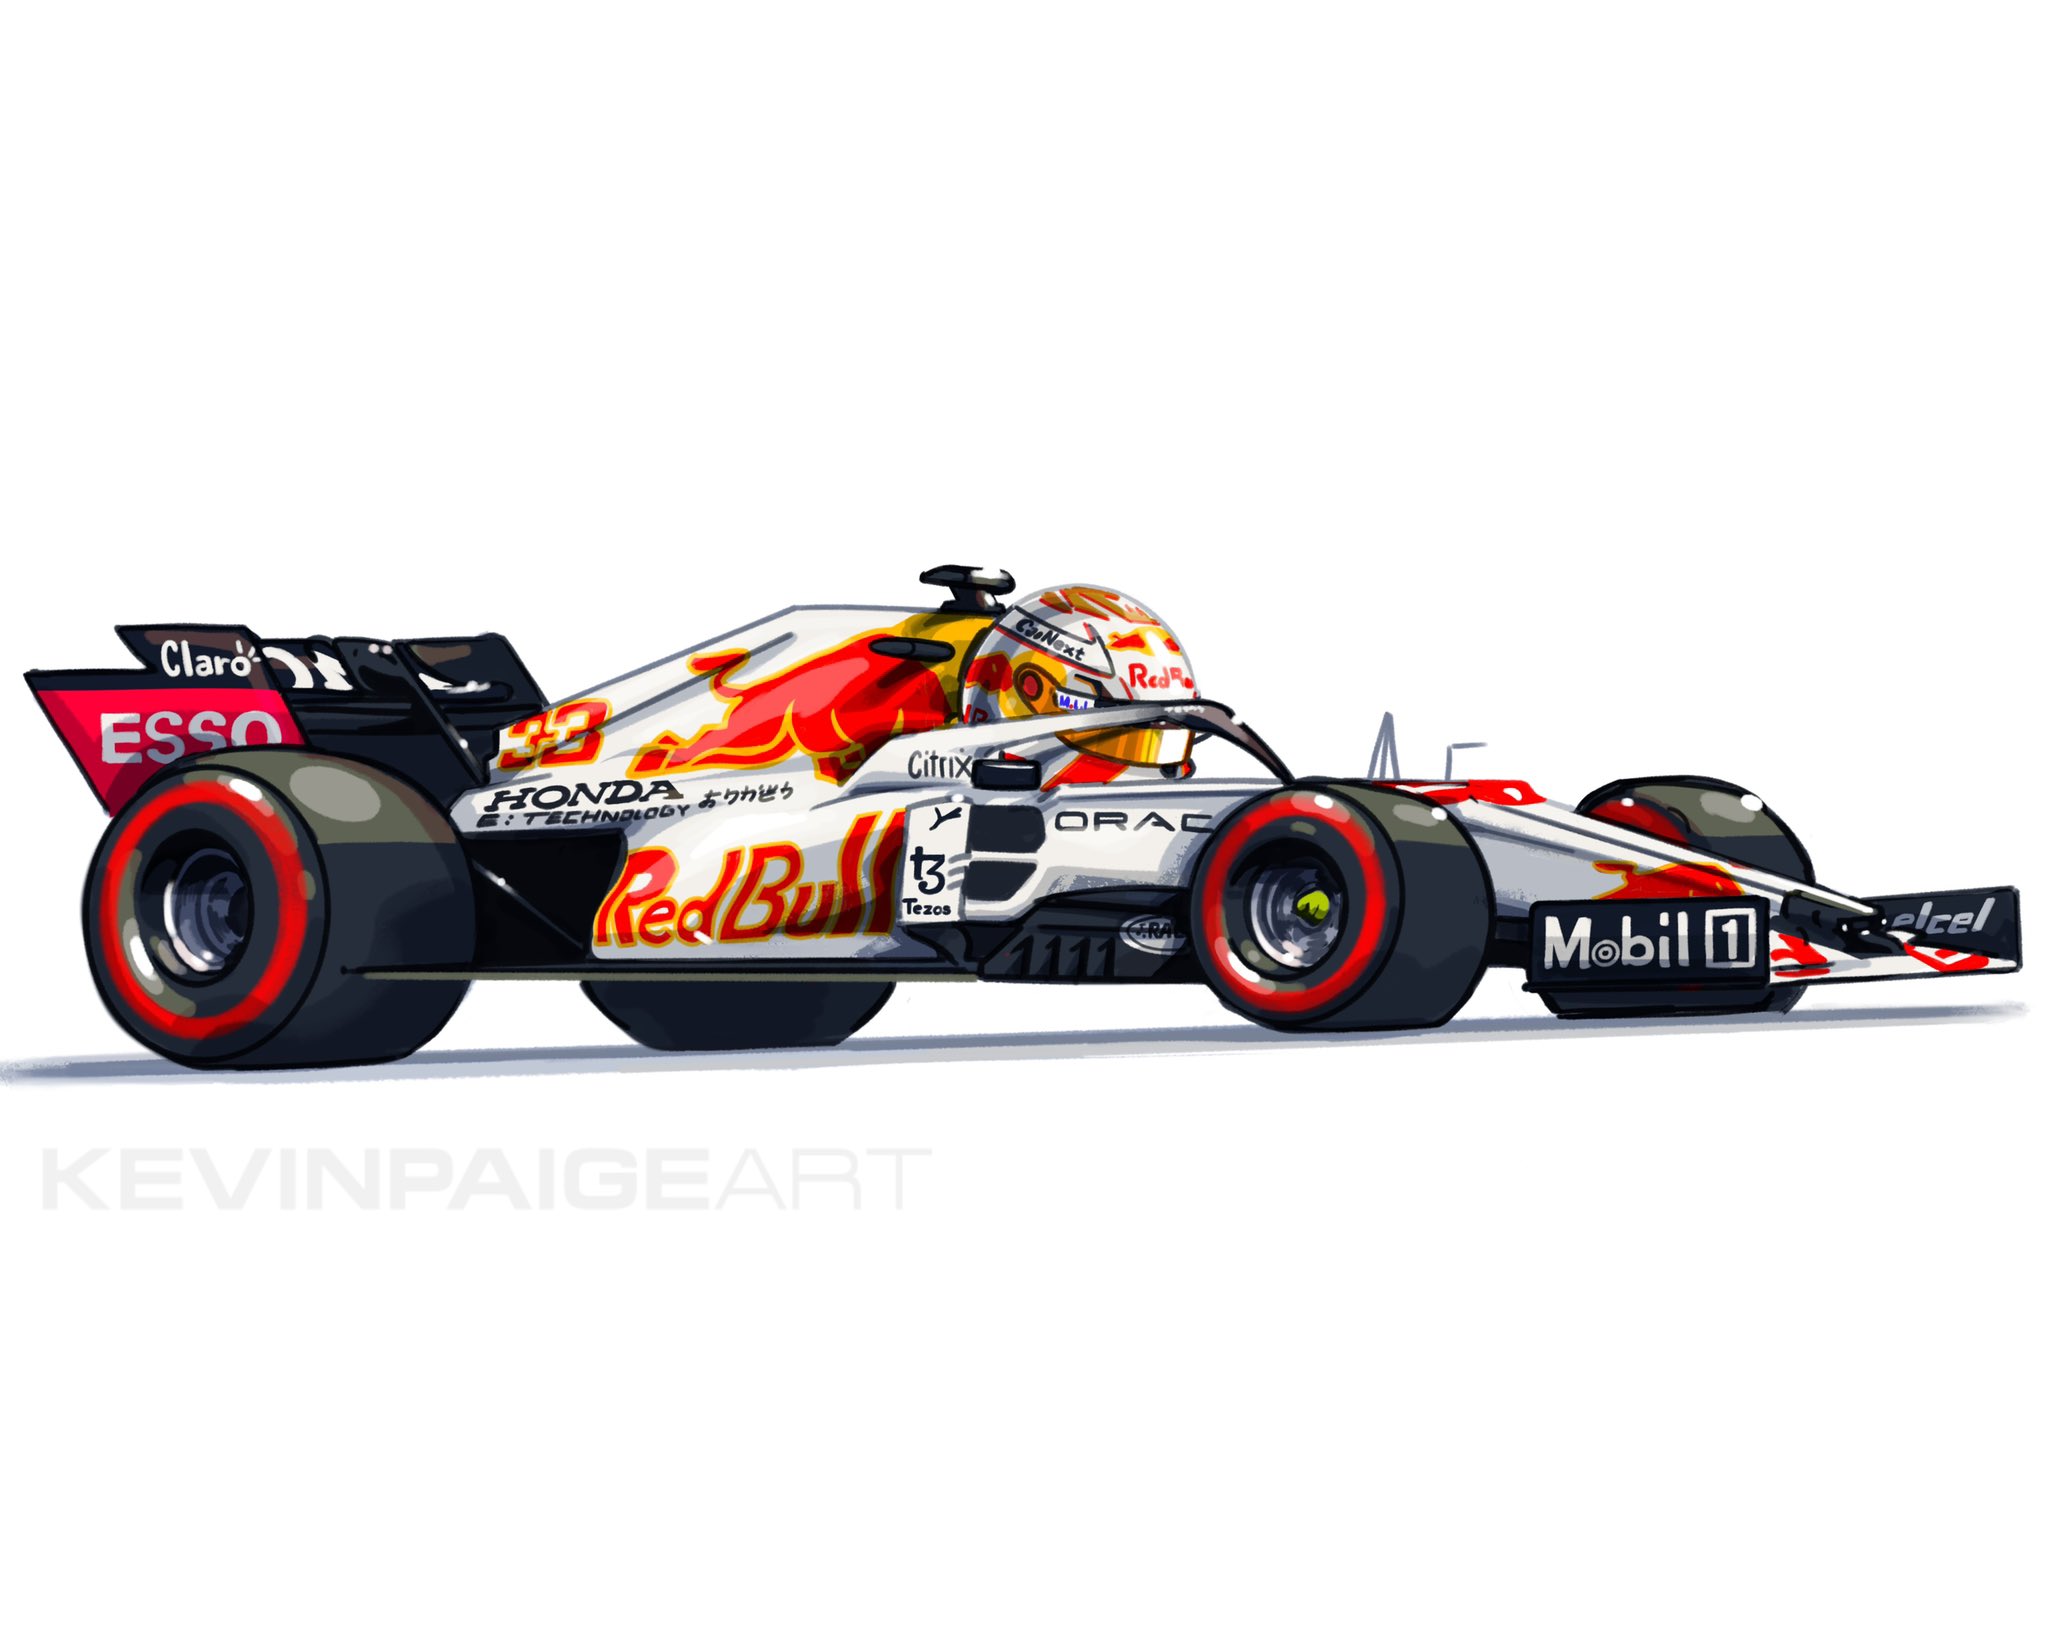 Kevin Paige Red Bull S 21 Turkish Gp Honda White Livery Loved The Matte Finish To It Redbull Verstappen Maxverstsppen Turkishgp Cartoon Drawing F1 Formula1 T Co 13dbgjiiuy Twitter